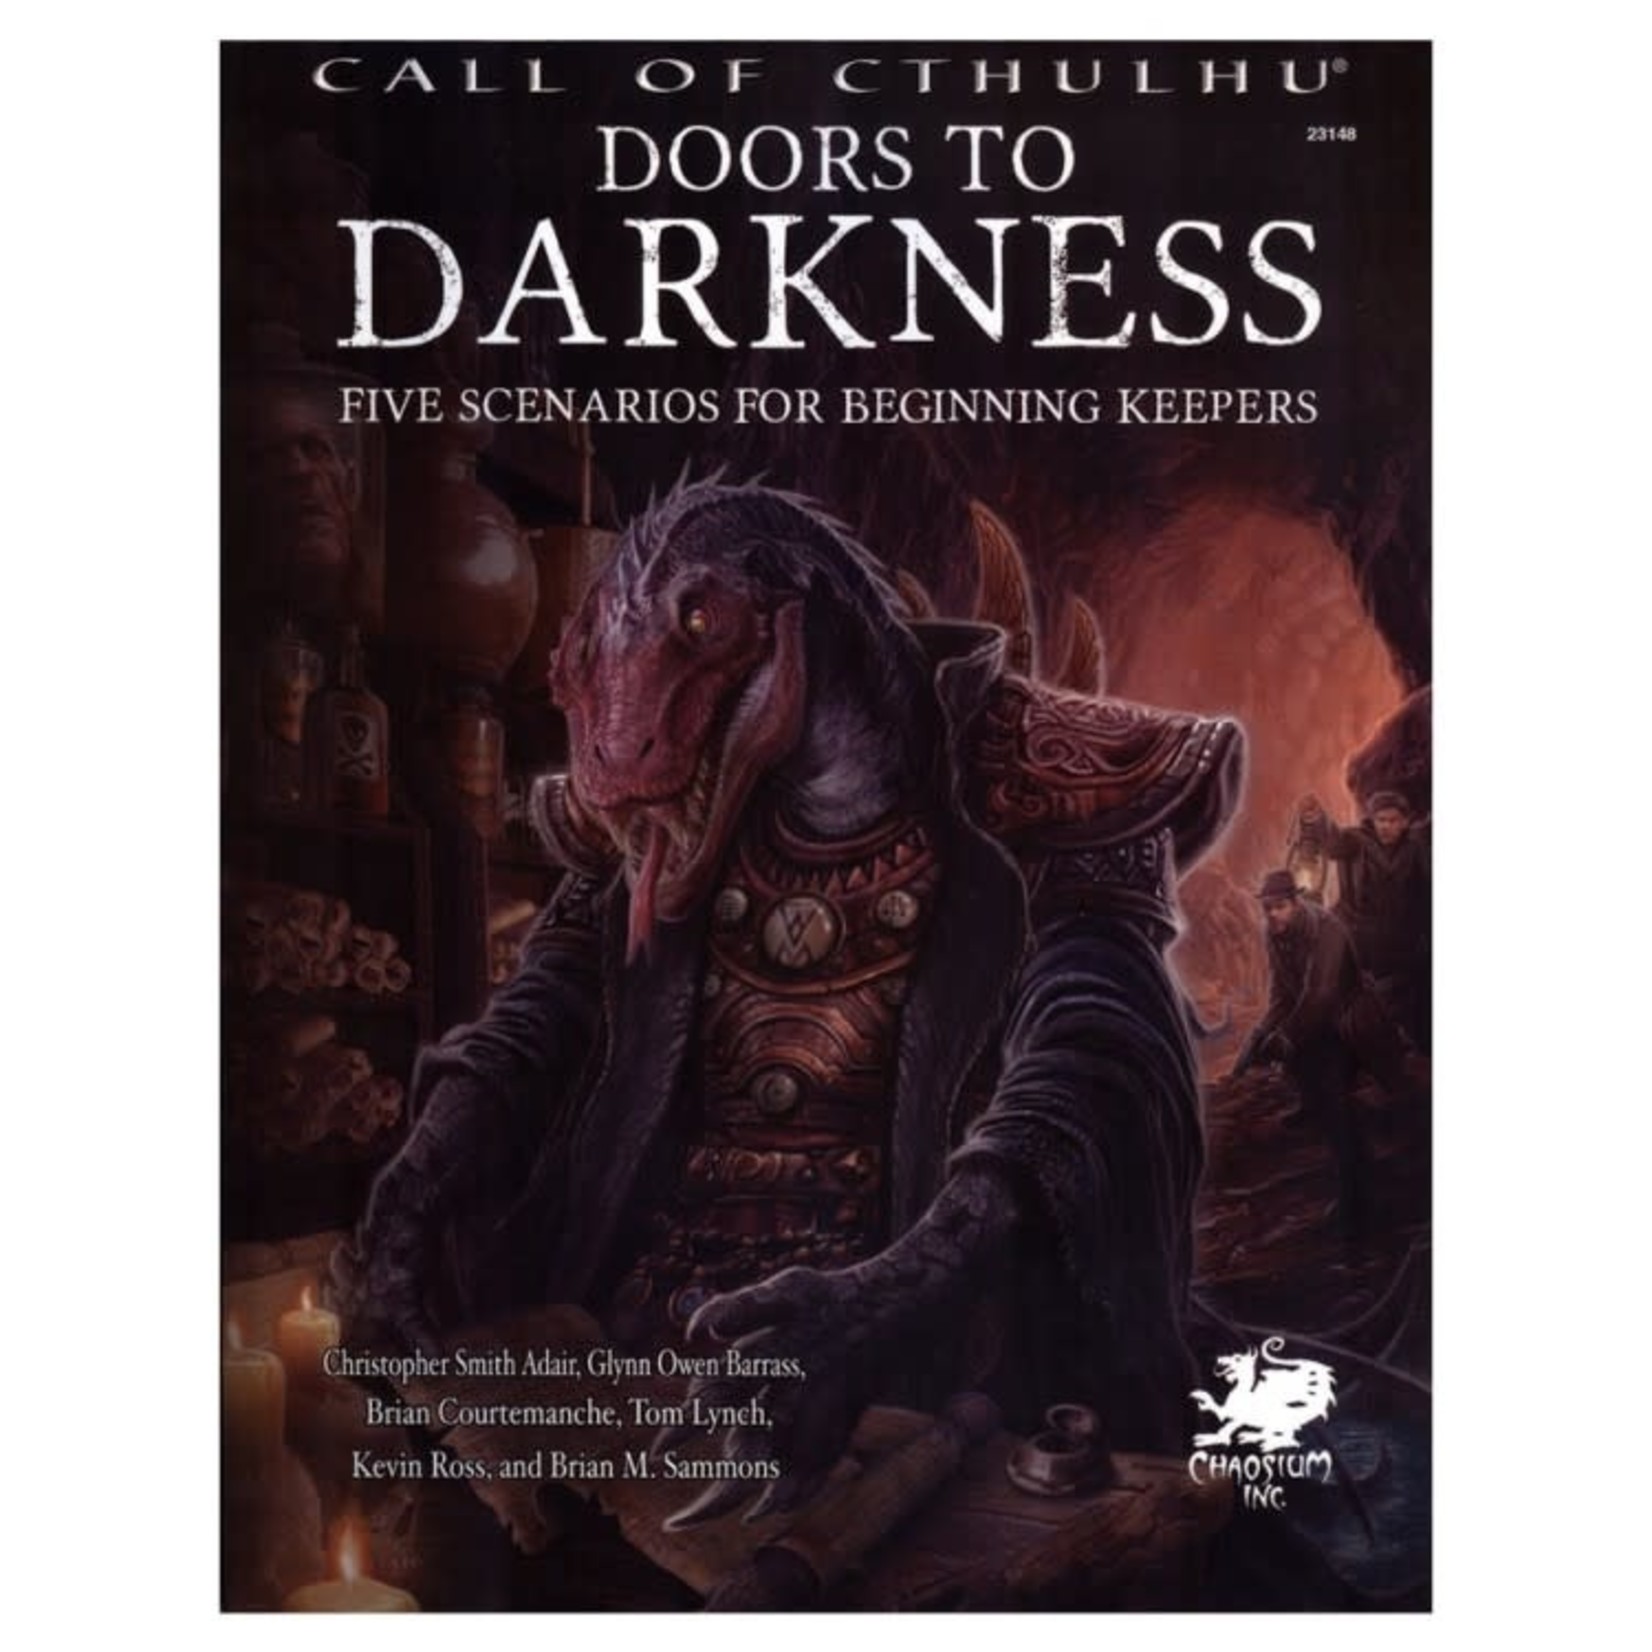 Chaosium Call of Cthulhu Doors to Darkness Five Scenarios for Beginning Keepers HC